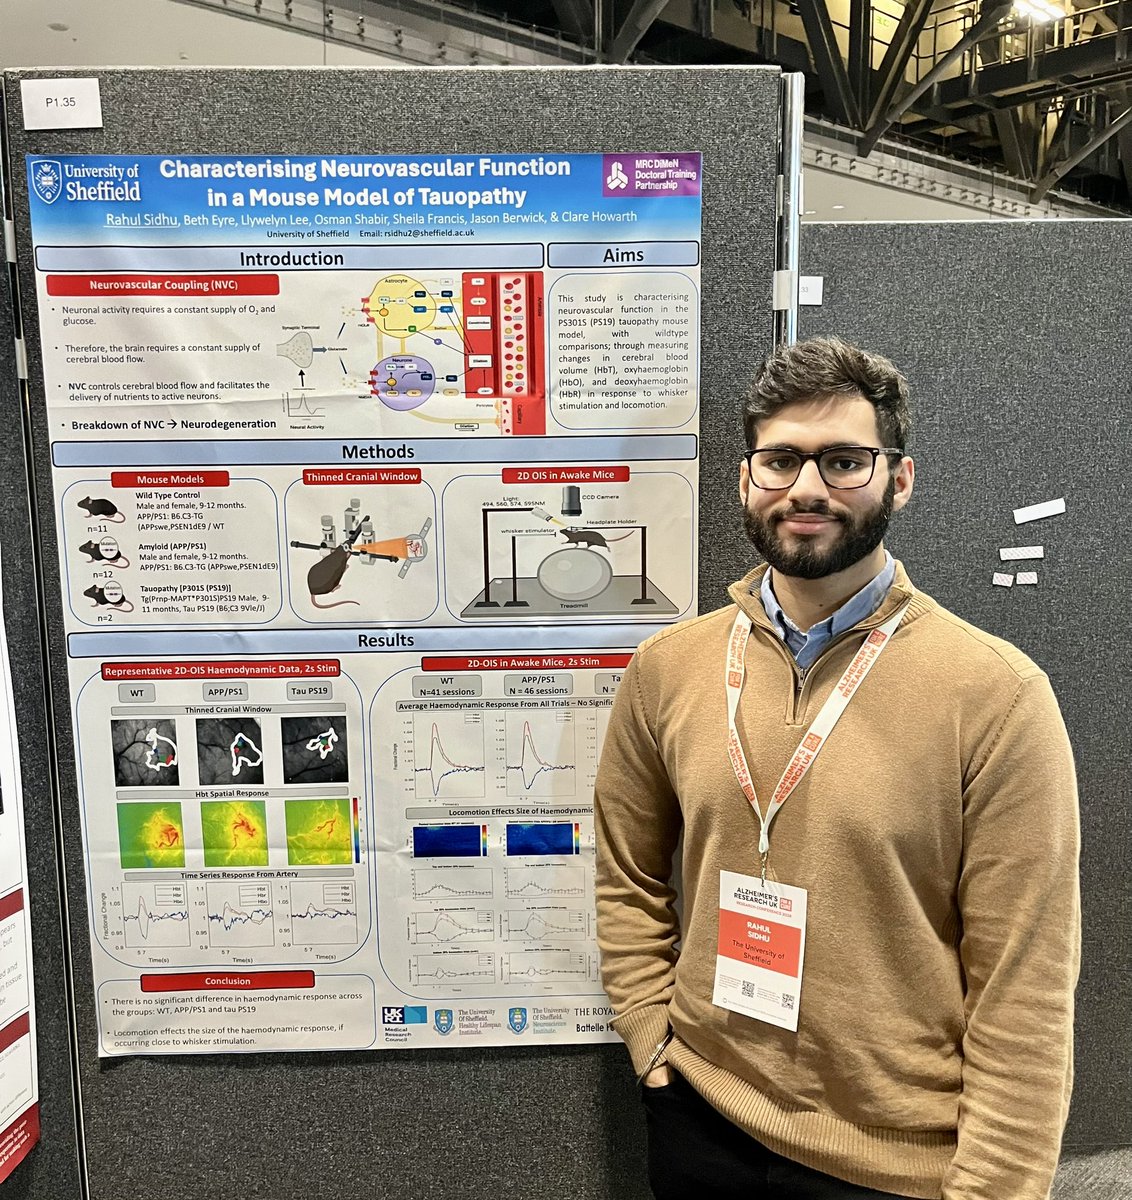 Had a brilliant time at Alzheimer's Research UK, presenting our research on neurovascular function in #Alzheimer’s disease. 

It was great to see all the amazing work, especially @tammarynlashley being awarded the Stuart Pickering Brown Prize. #ARUKconf24 @ARUKscientist